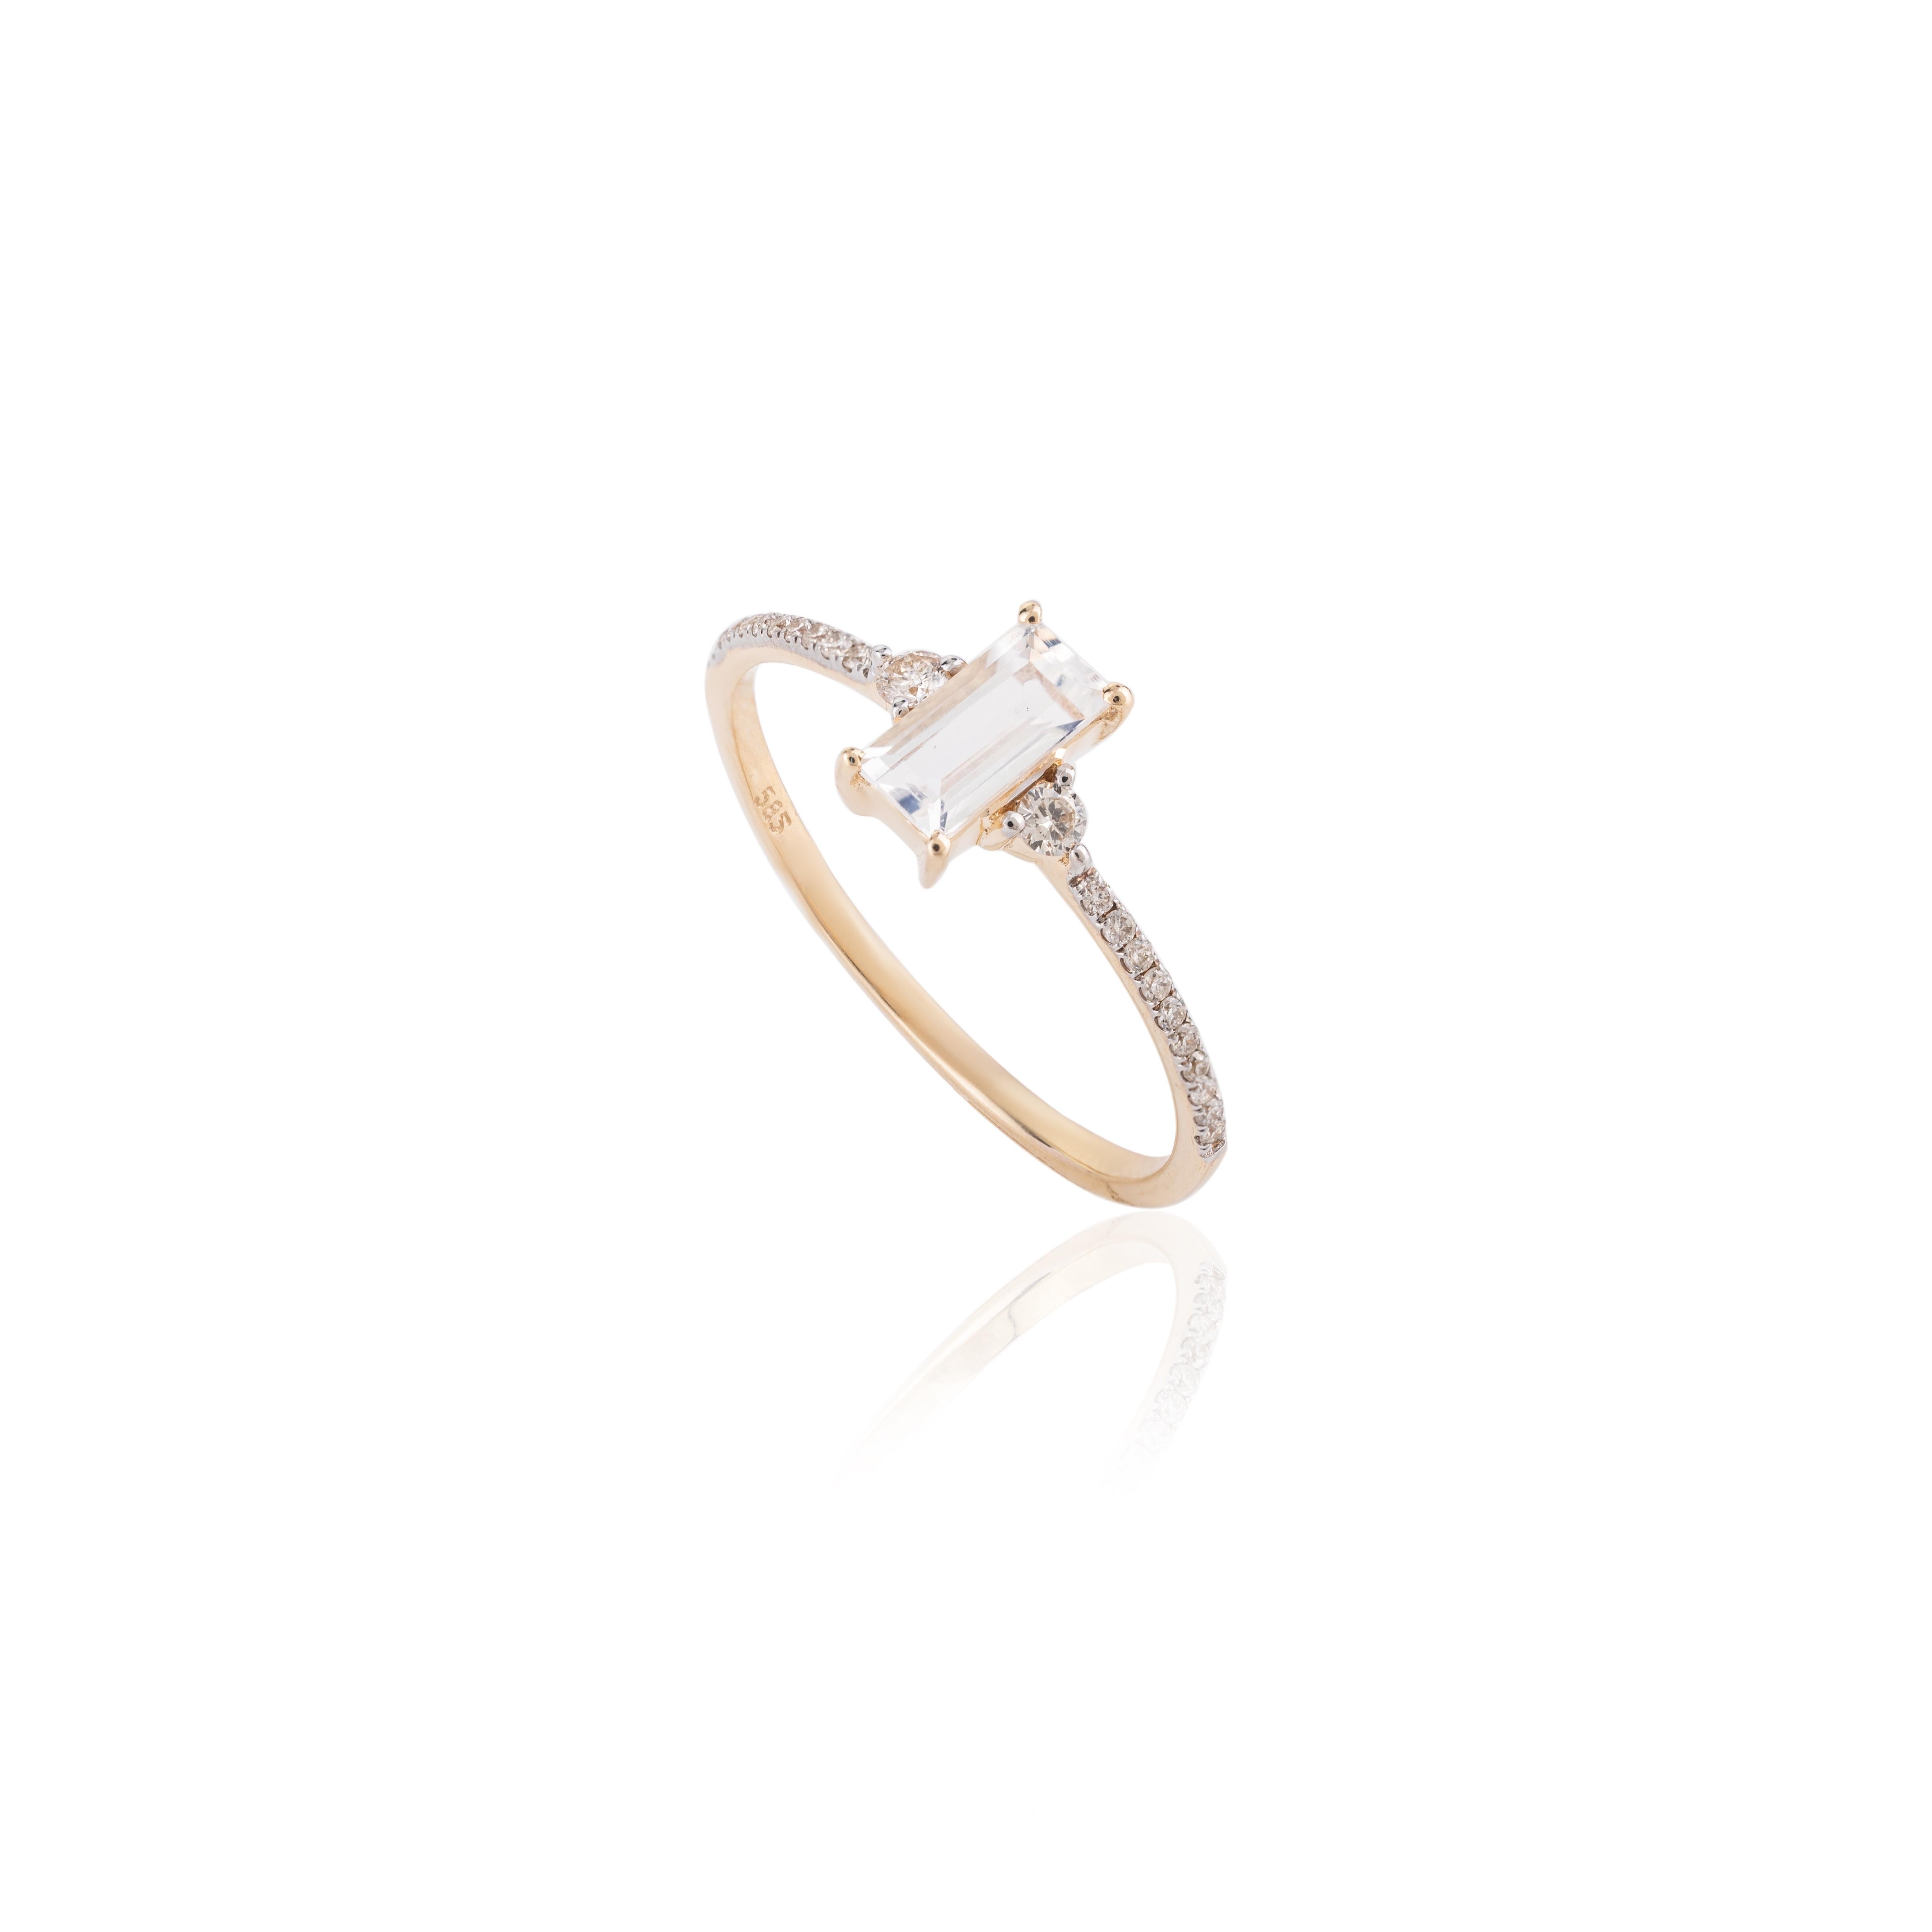 For Sale:  Dainty Baguette Moonstone Diamond Everyday Ring in 14k Solid Yellow Gold 8